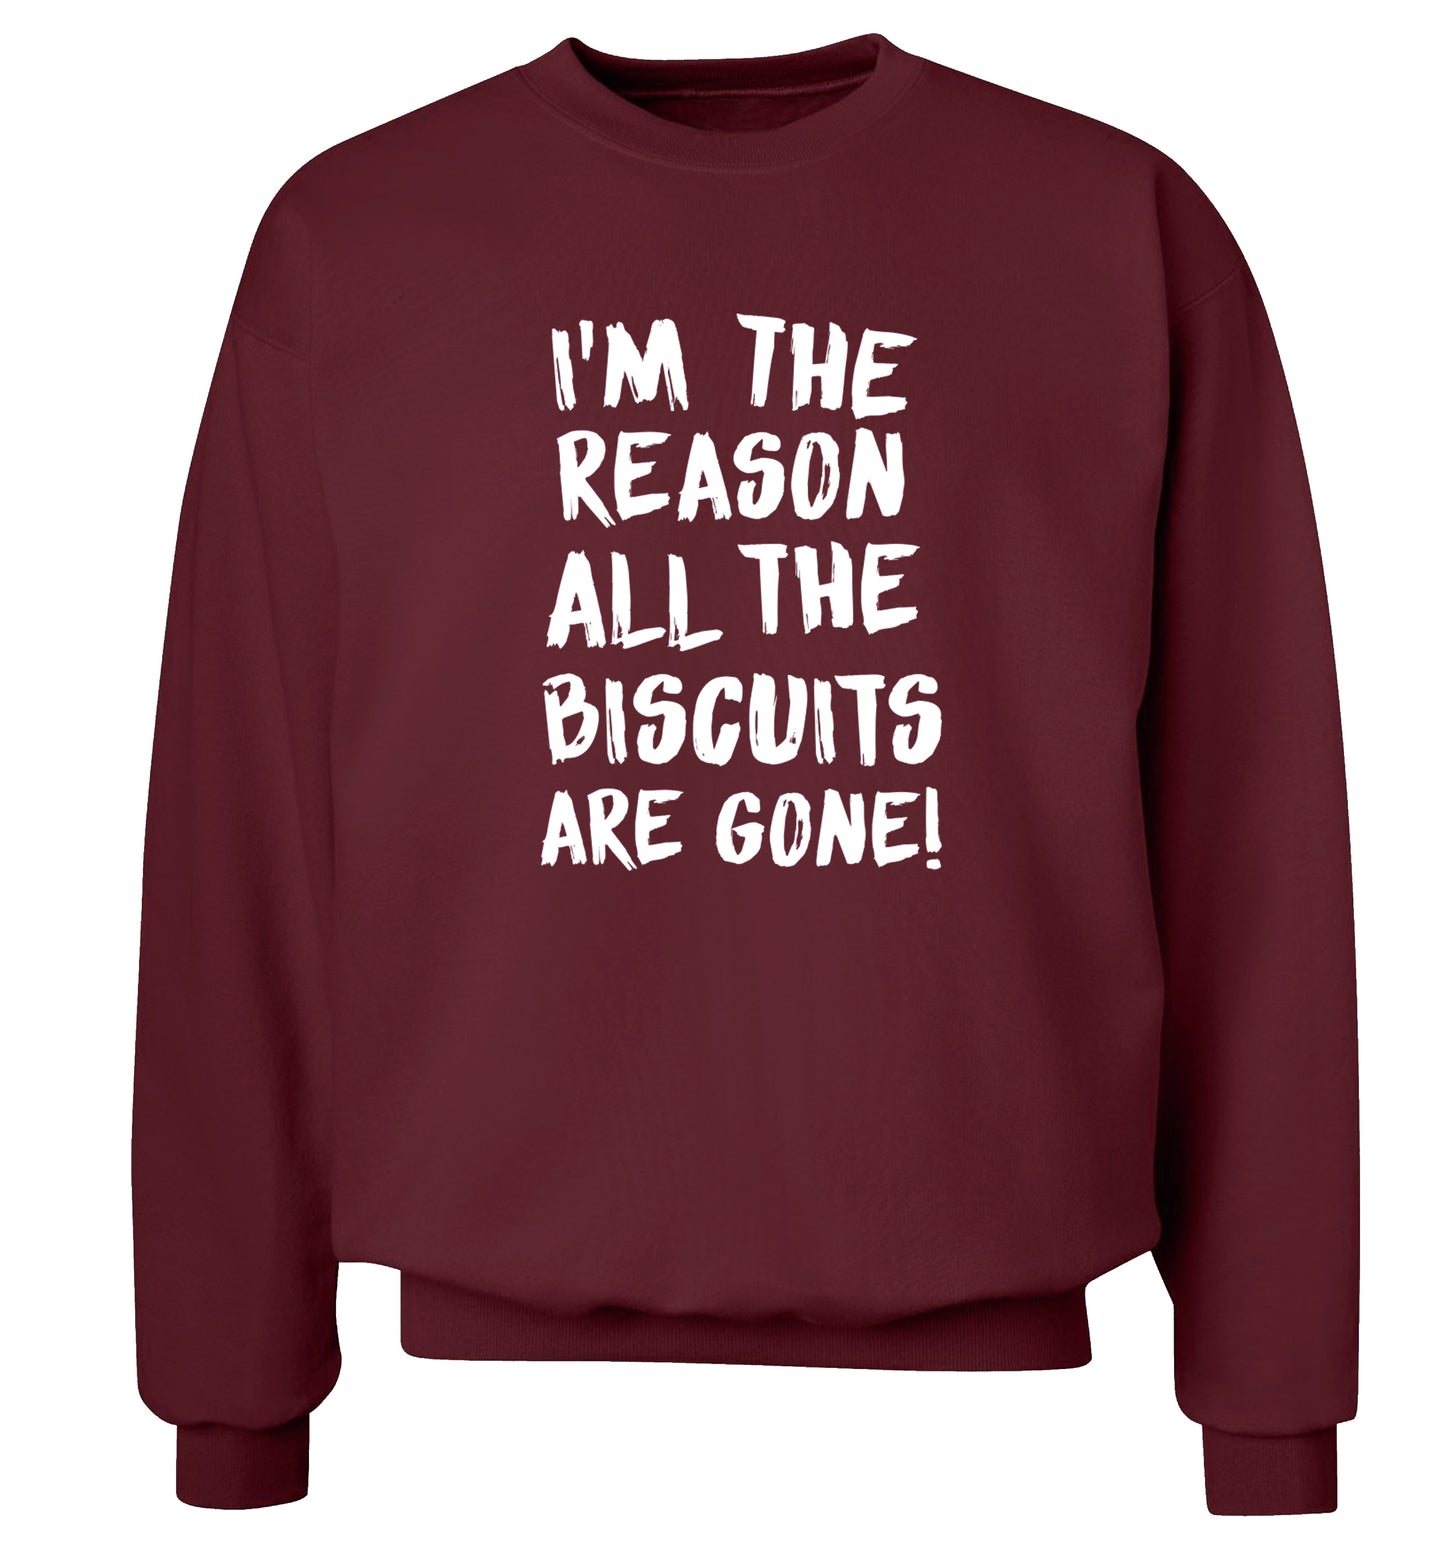 I'm the reason why all the biscuits are gone Adult's unisex maroon Sweater 2XL